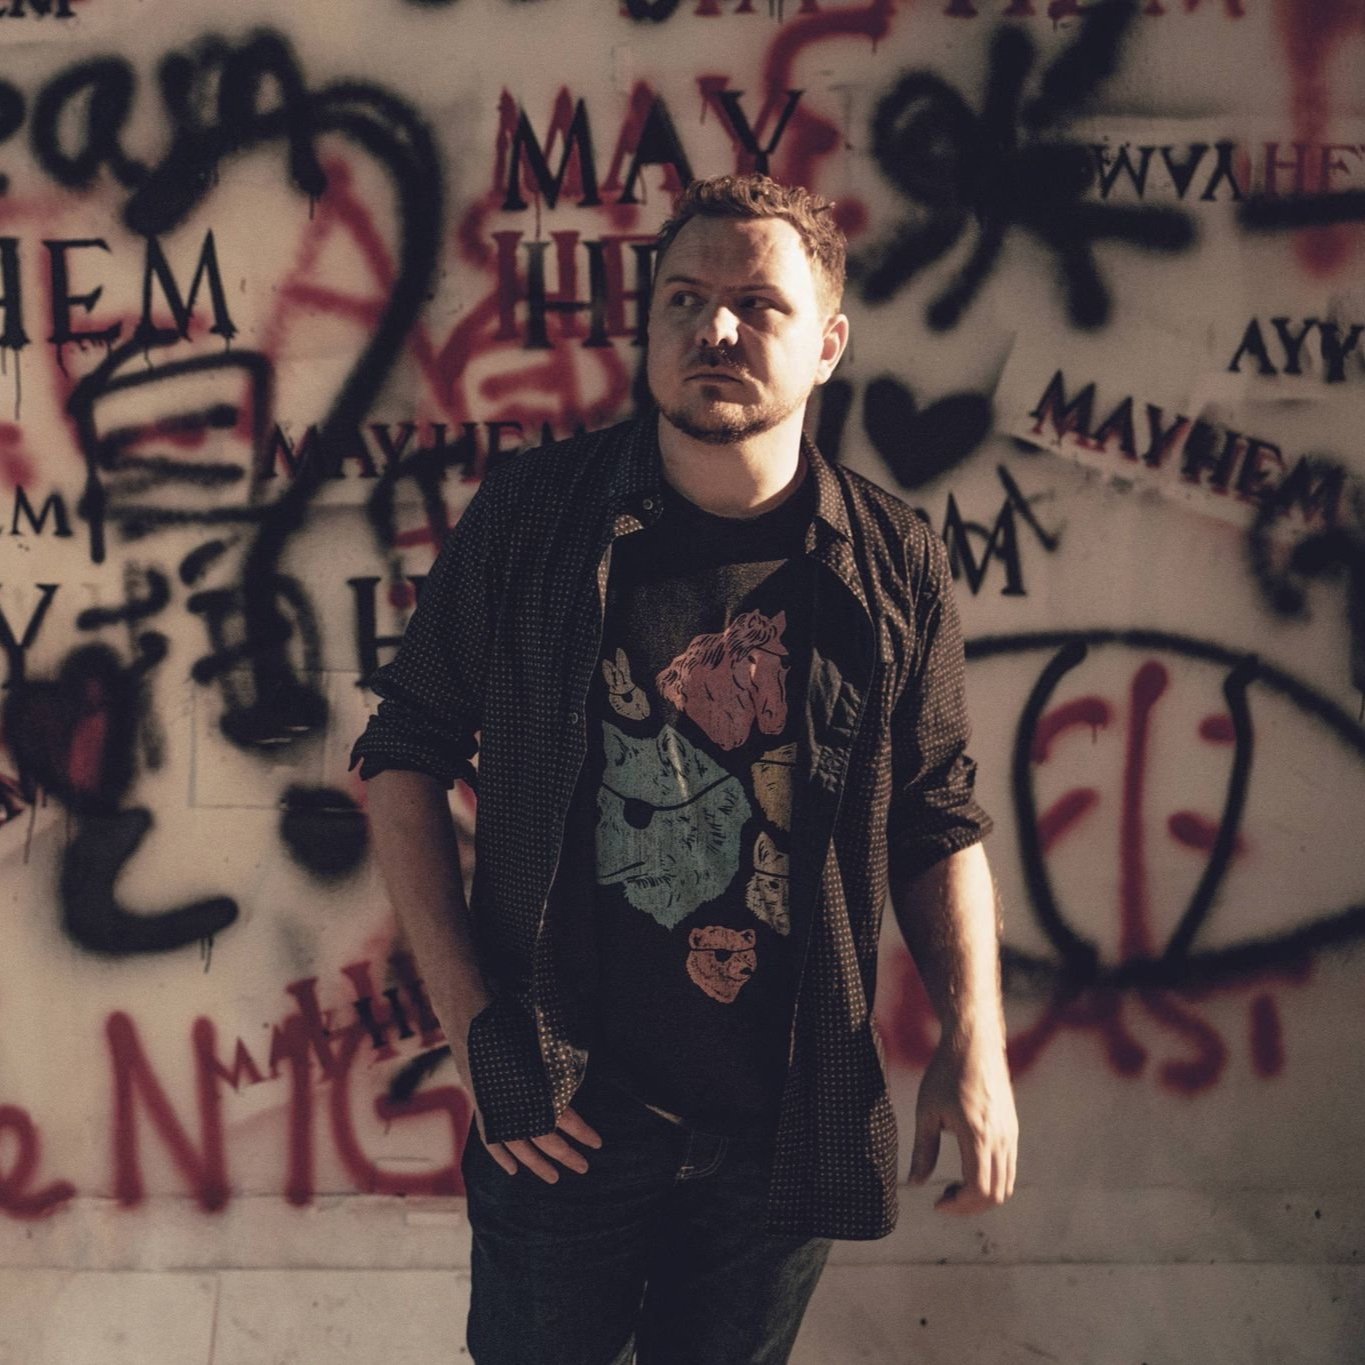  image of poet Mark Grist, a white man wearing an open brown shirt with a top underneath and jeans, posed walking away from a graffiti laden wall 